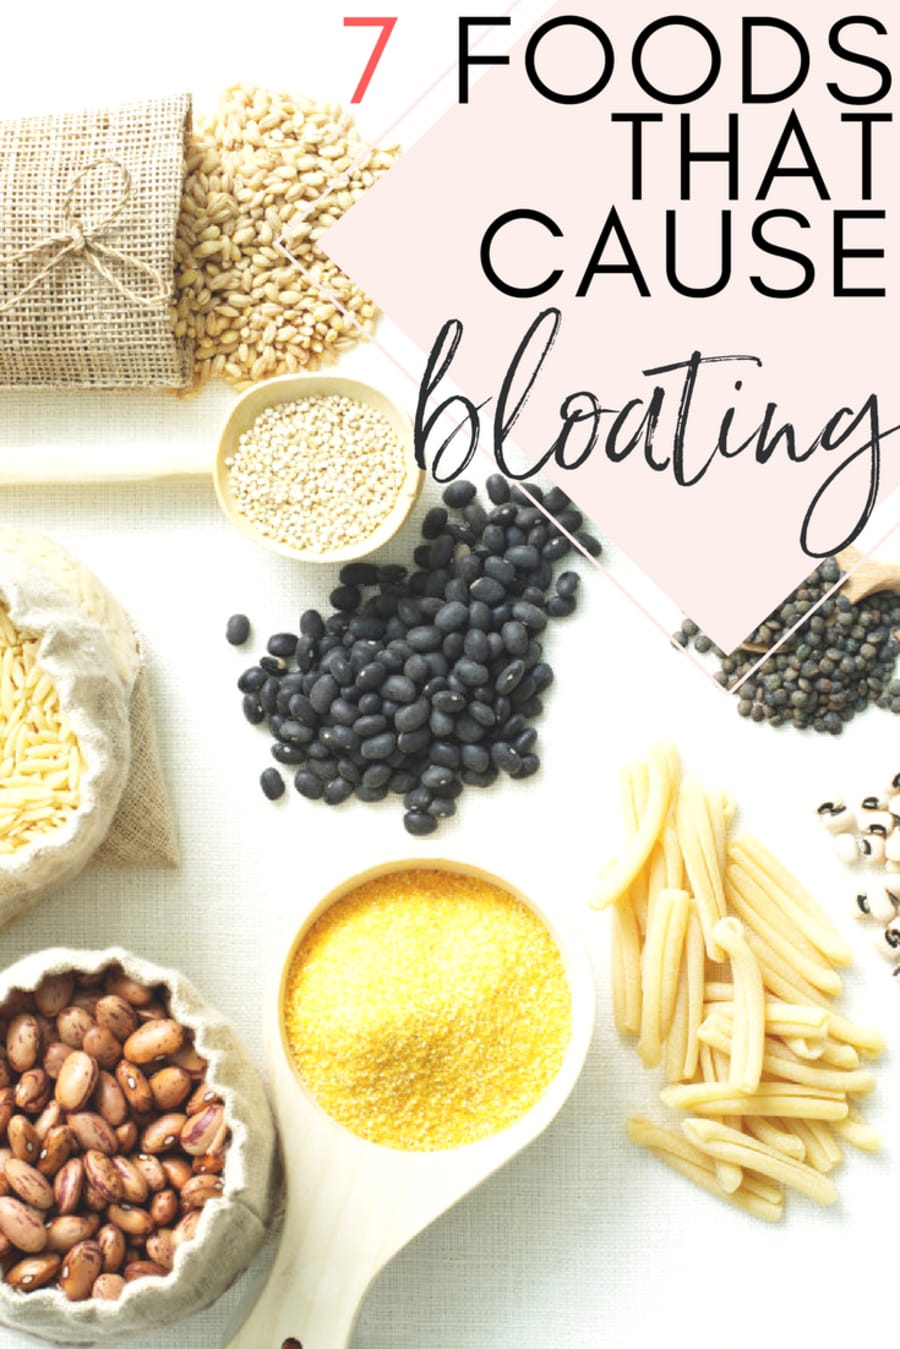 7 foods that can cause belly bloat (and what can help) | huffpost